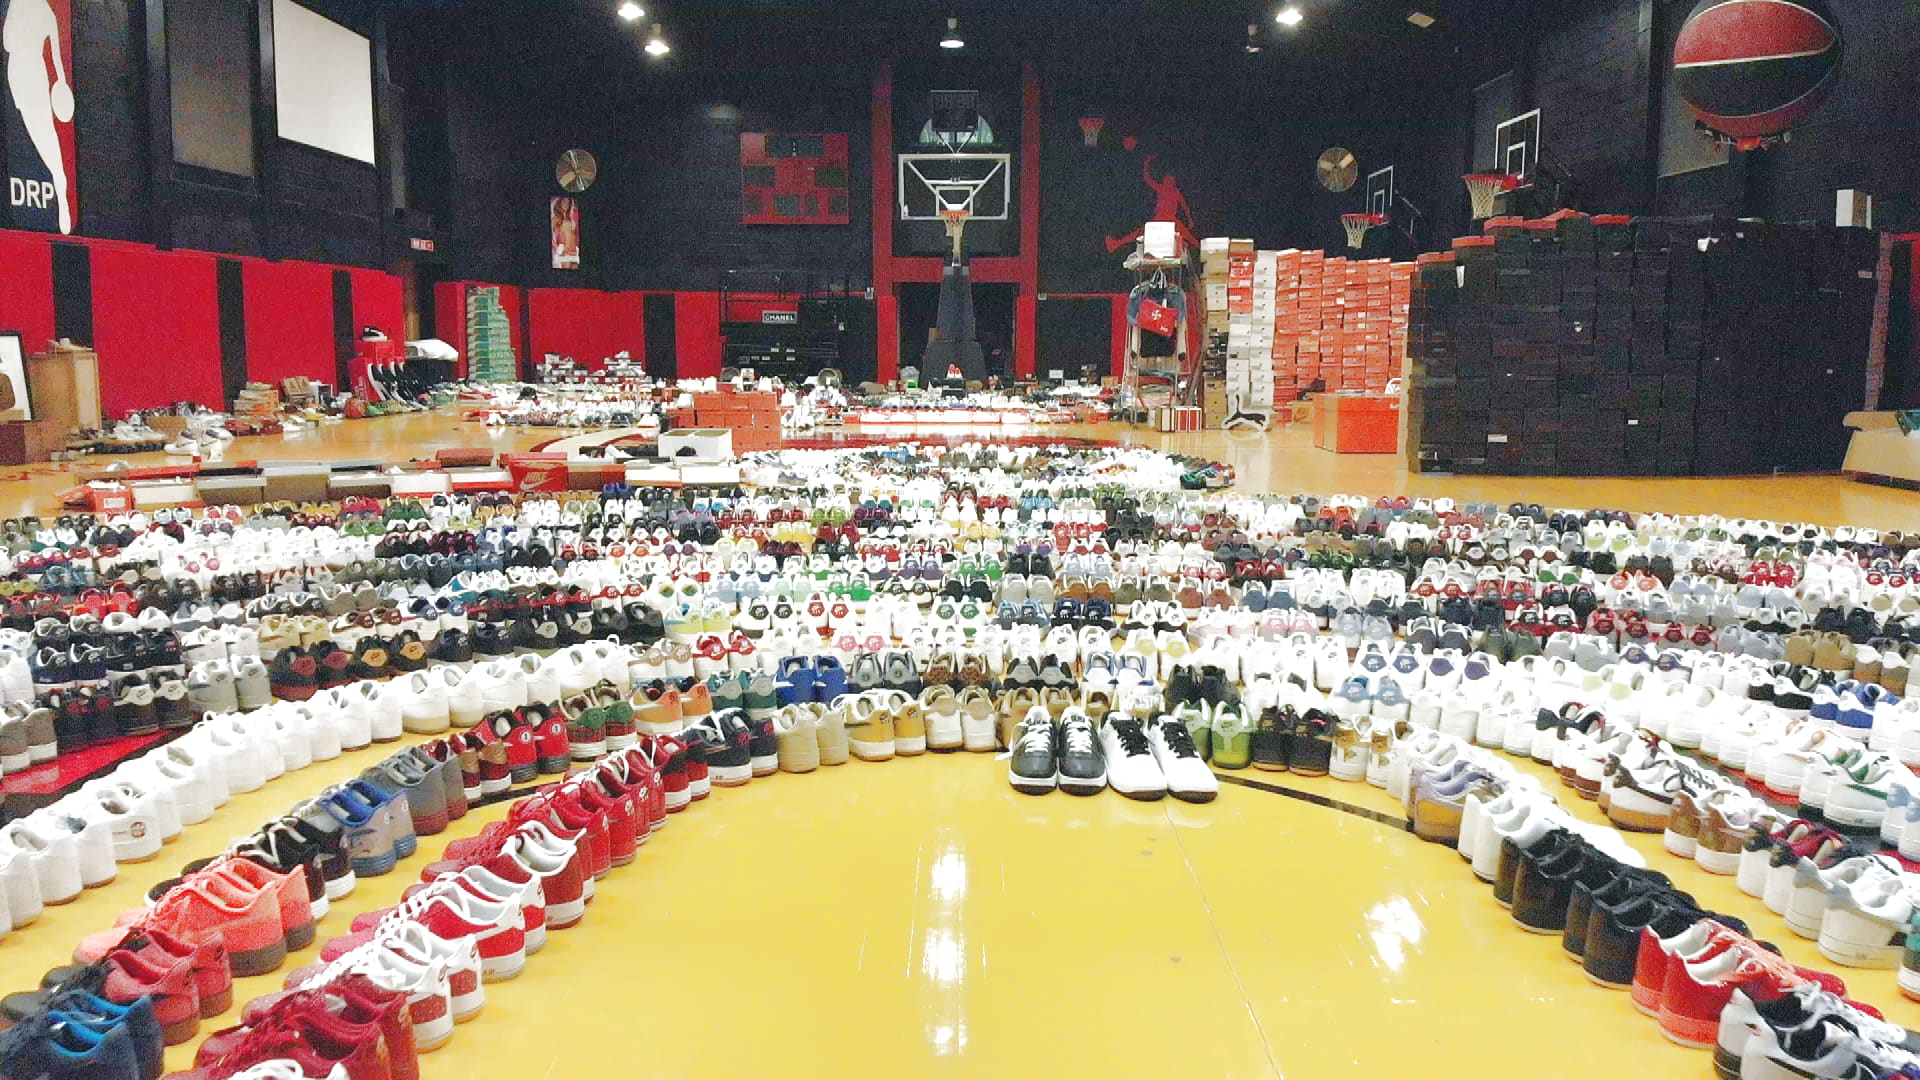 Photos: Sneaker collection worth millions, owned by Chicks with Kicks